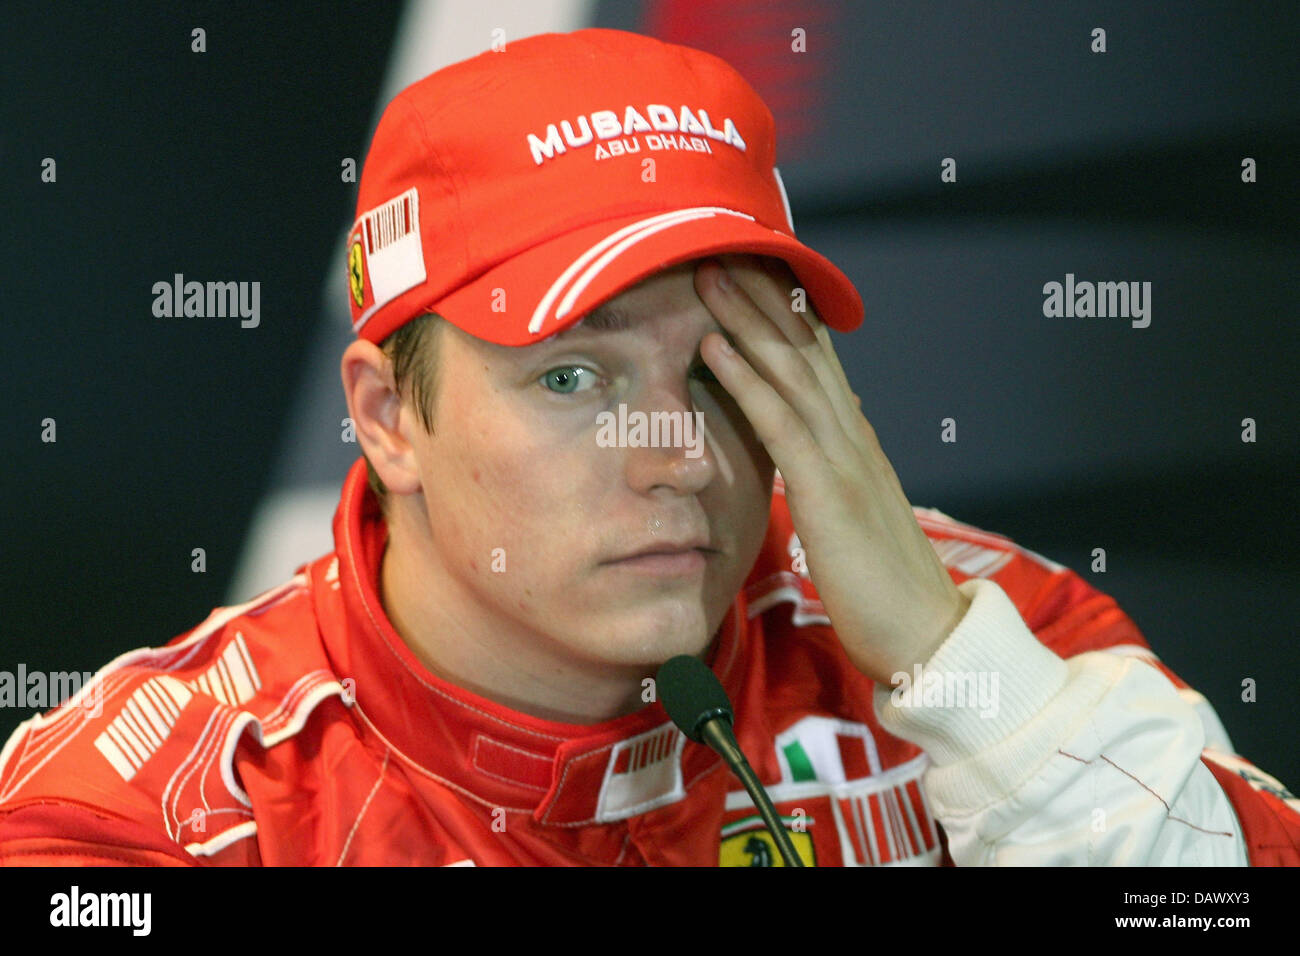 Finnish Formula One pilot Kimi Raikkonen of Ferrari touches his face during a press conference after the qualifying session at the Circuit de Catalunya race track near Barcelona, Spain, 12 May 2007. The 2007 Formula 1 Grand Prix of Spain takes place on 13 May. Photo: CARMEN JASPERSEN Stock Photo